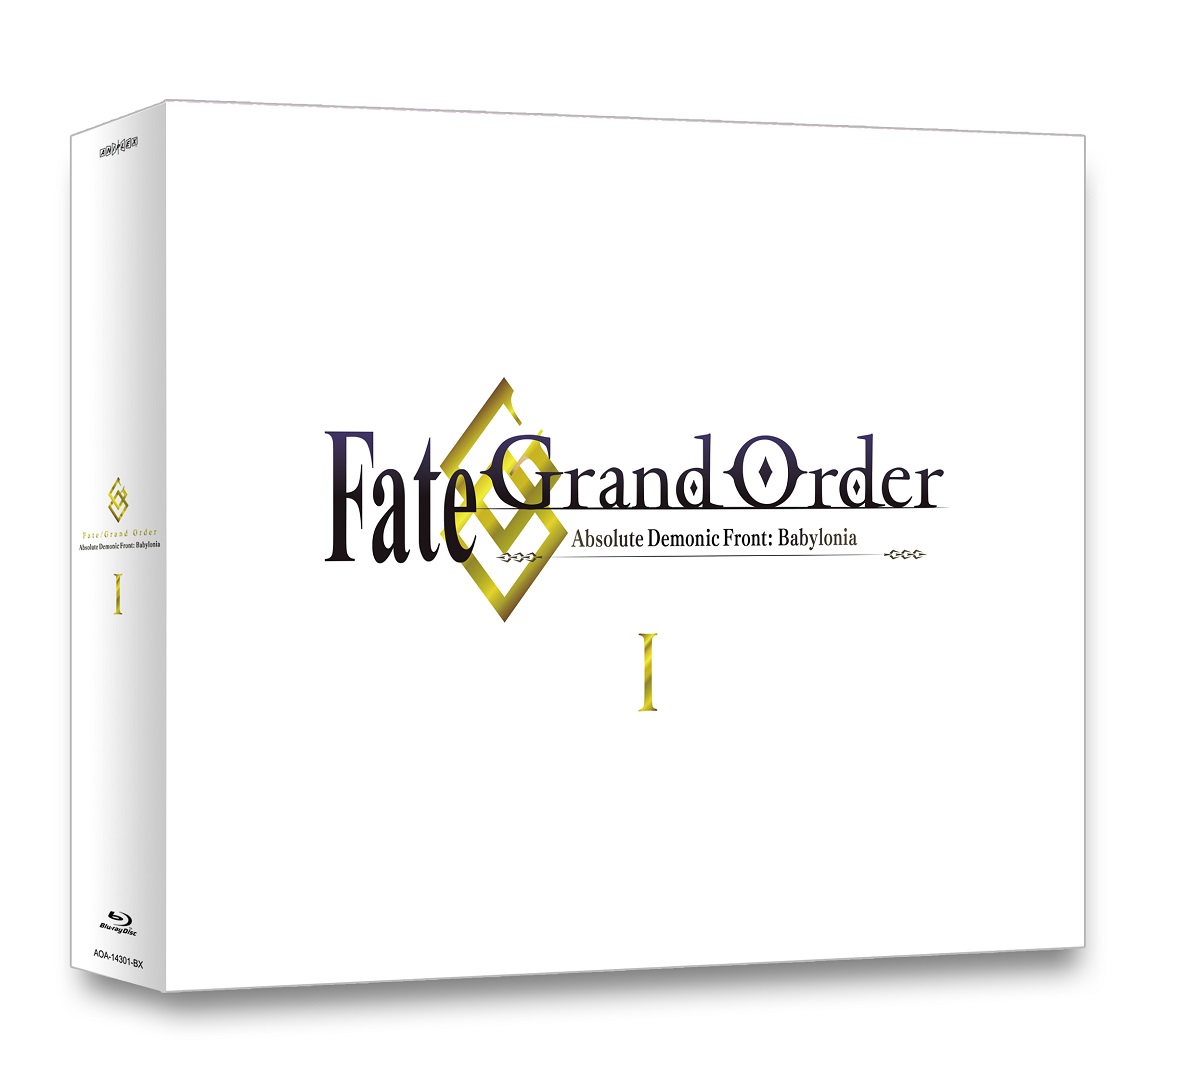 Fate/Grand Order Absolute Demonic Front: Babylonia Official USA Website